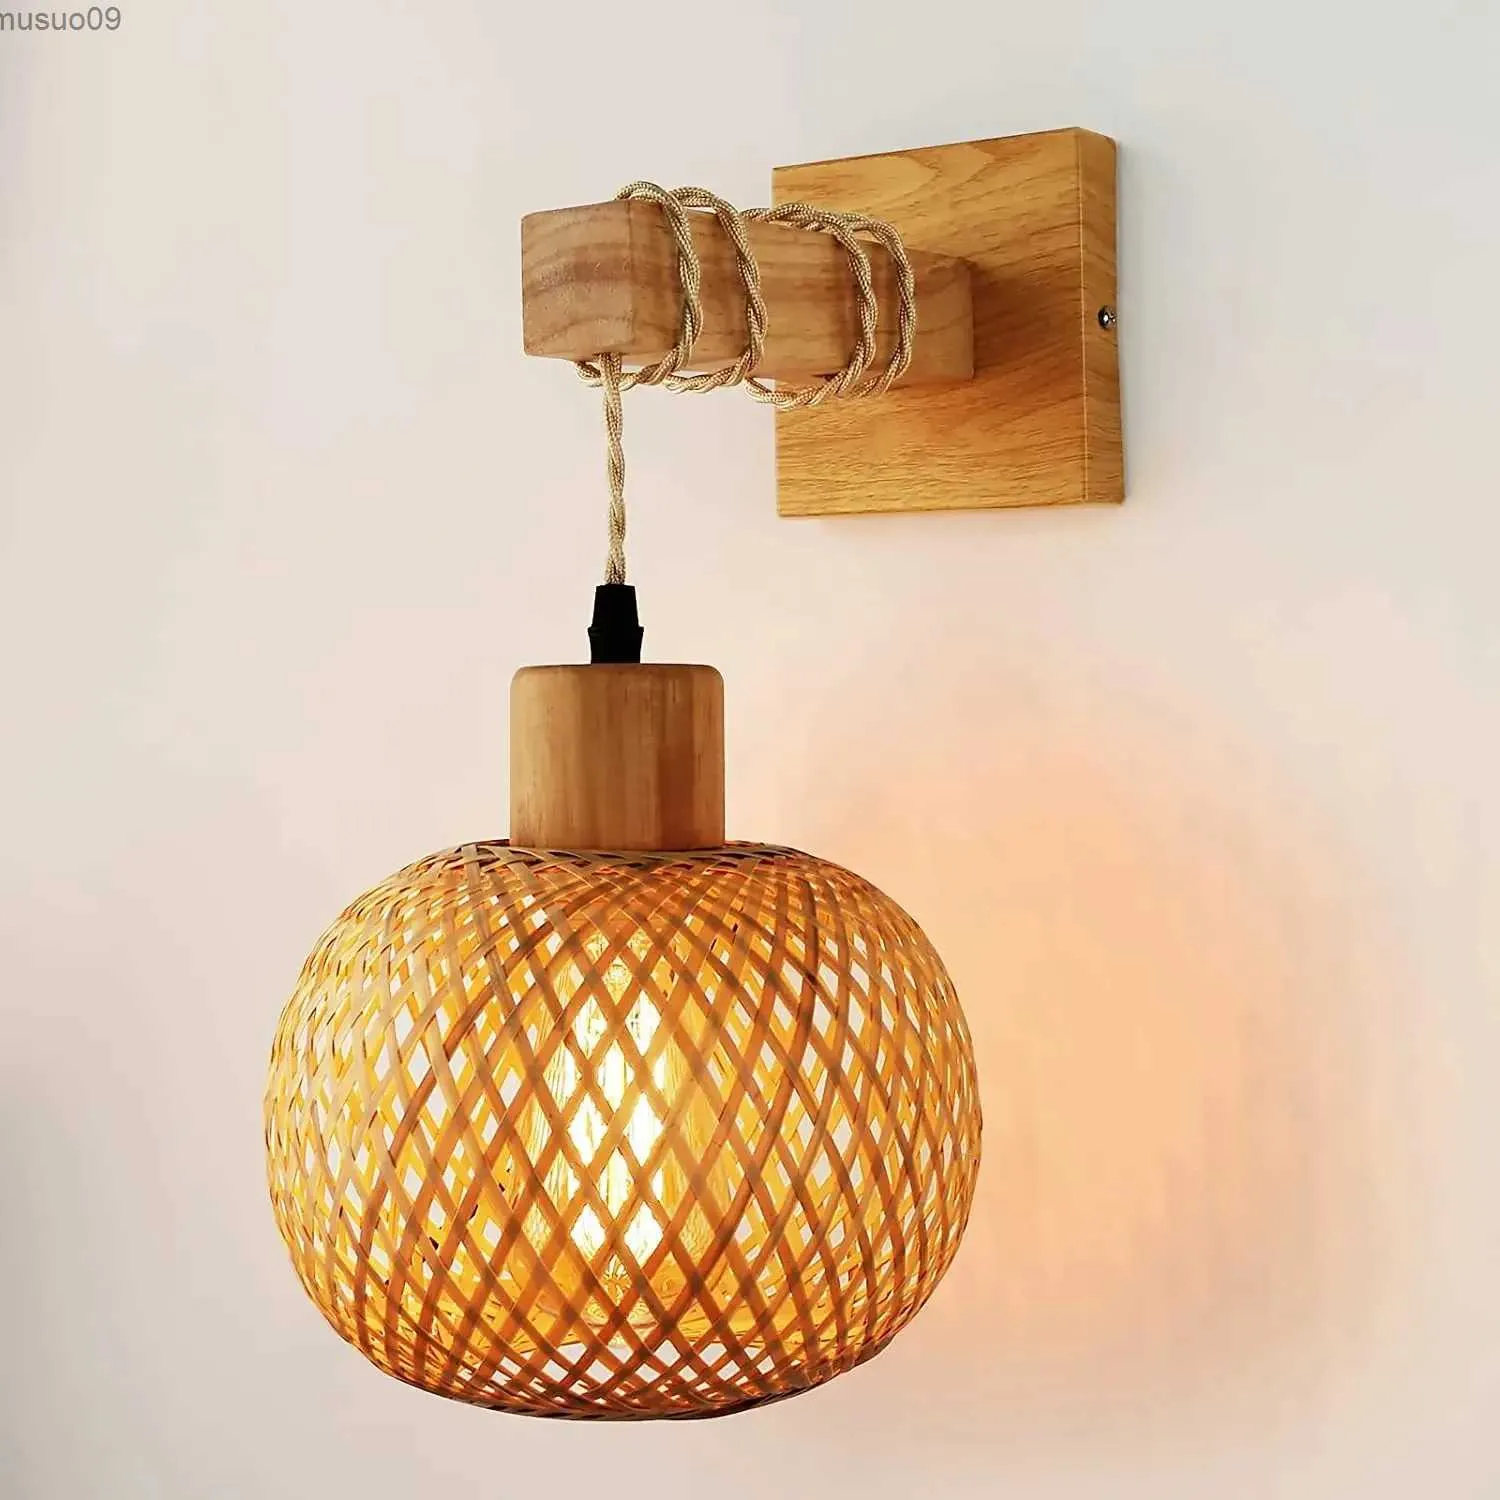 Wall Lamp Retro Japanese Style Bamboo Wall Lamp Restaurant Rattan Lighting Bedside Bedroom Farmhouse Country Interior Background Wall Lamp